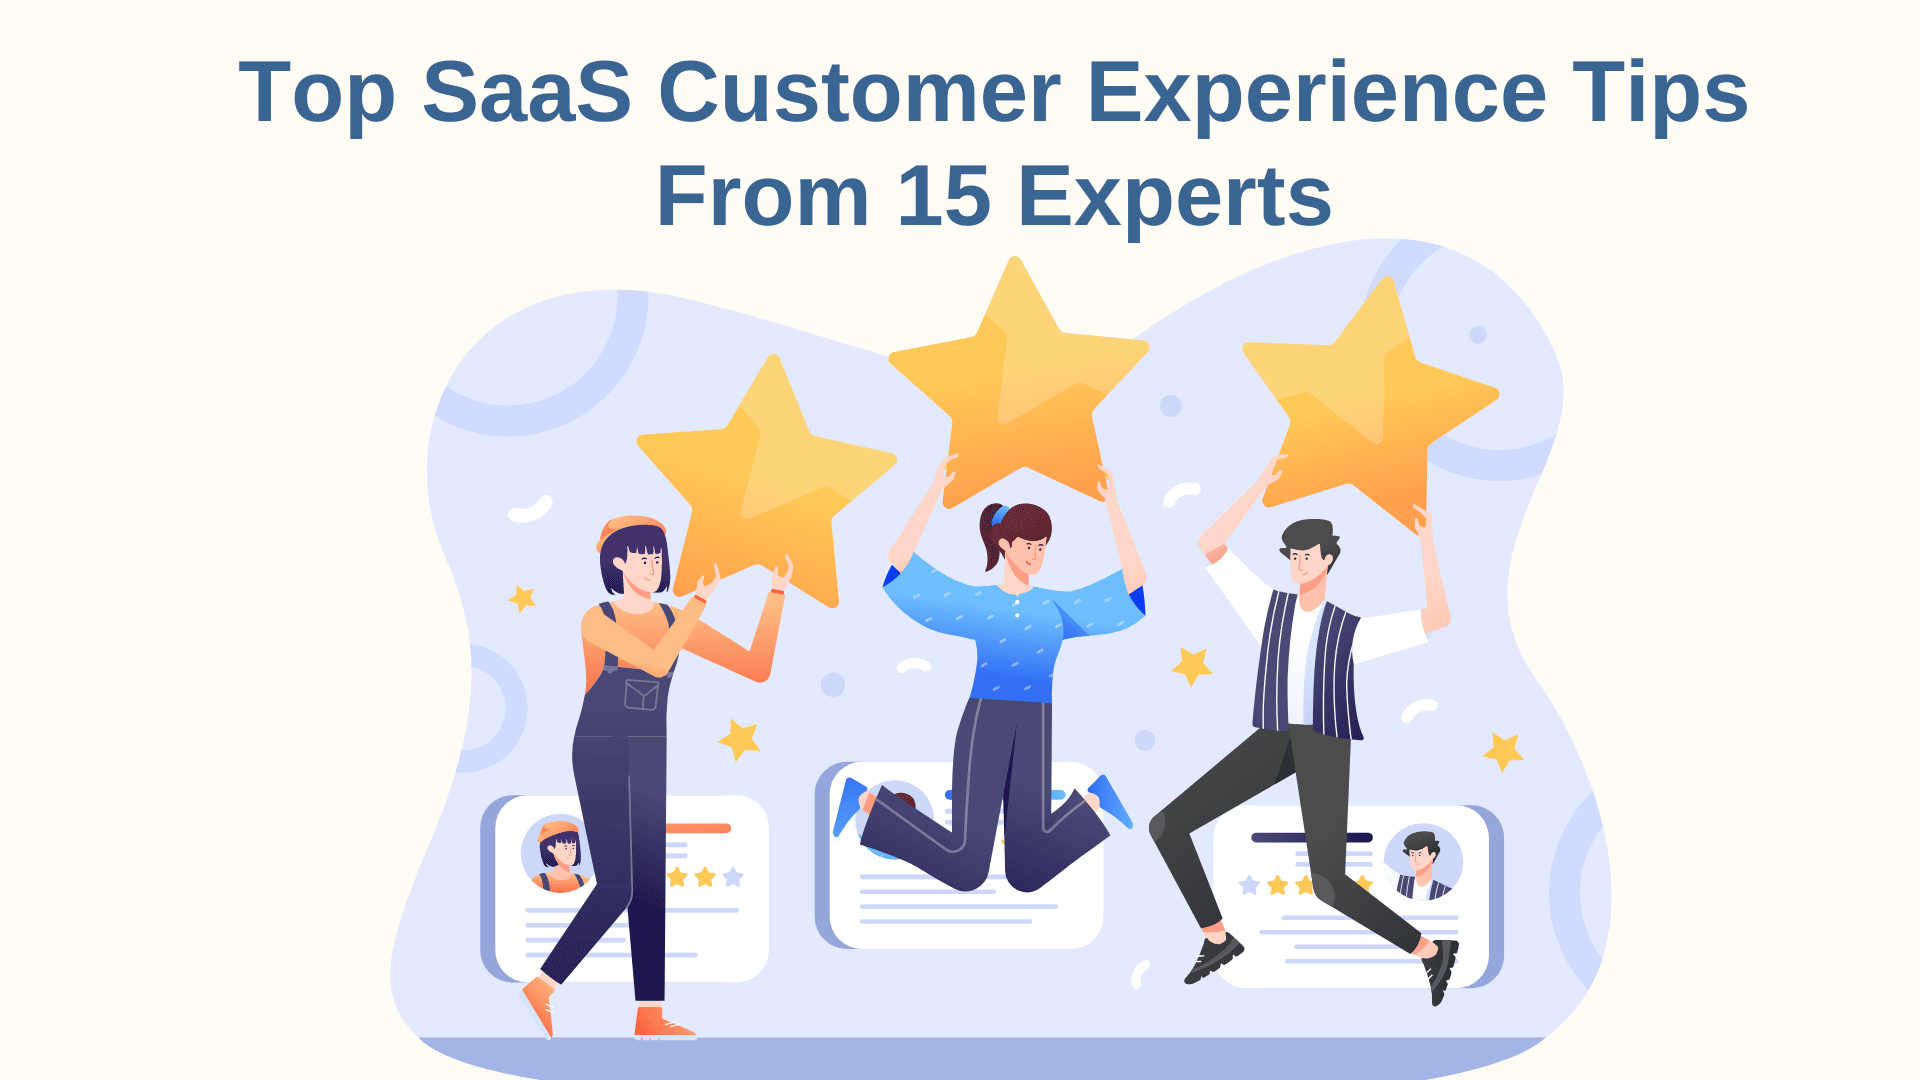 SaaS Customer Experience: 15 Experts Share Their Best Tips To Master It